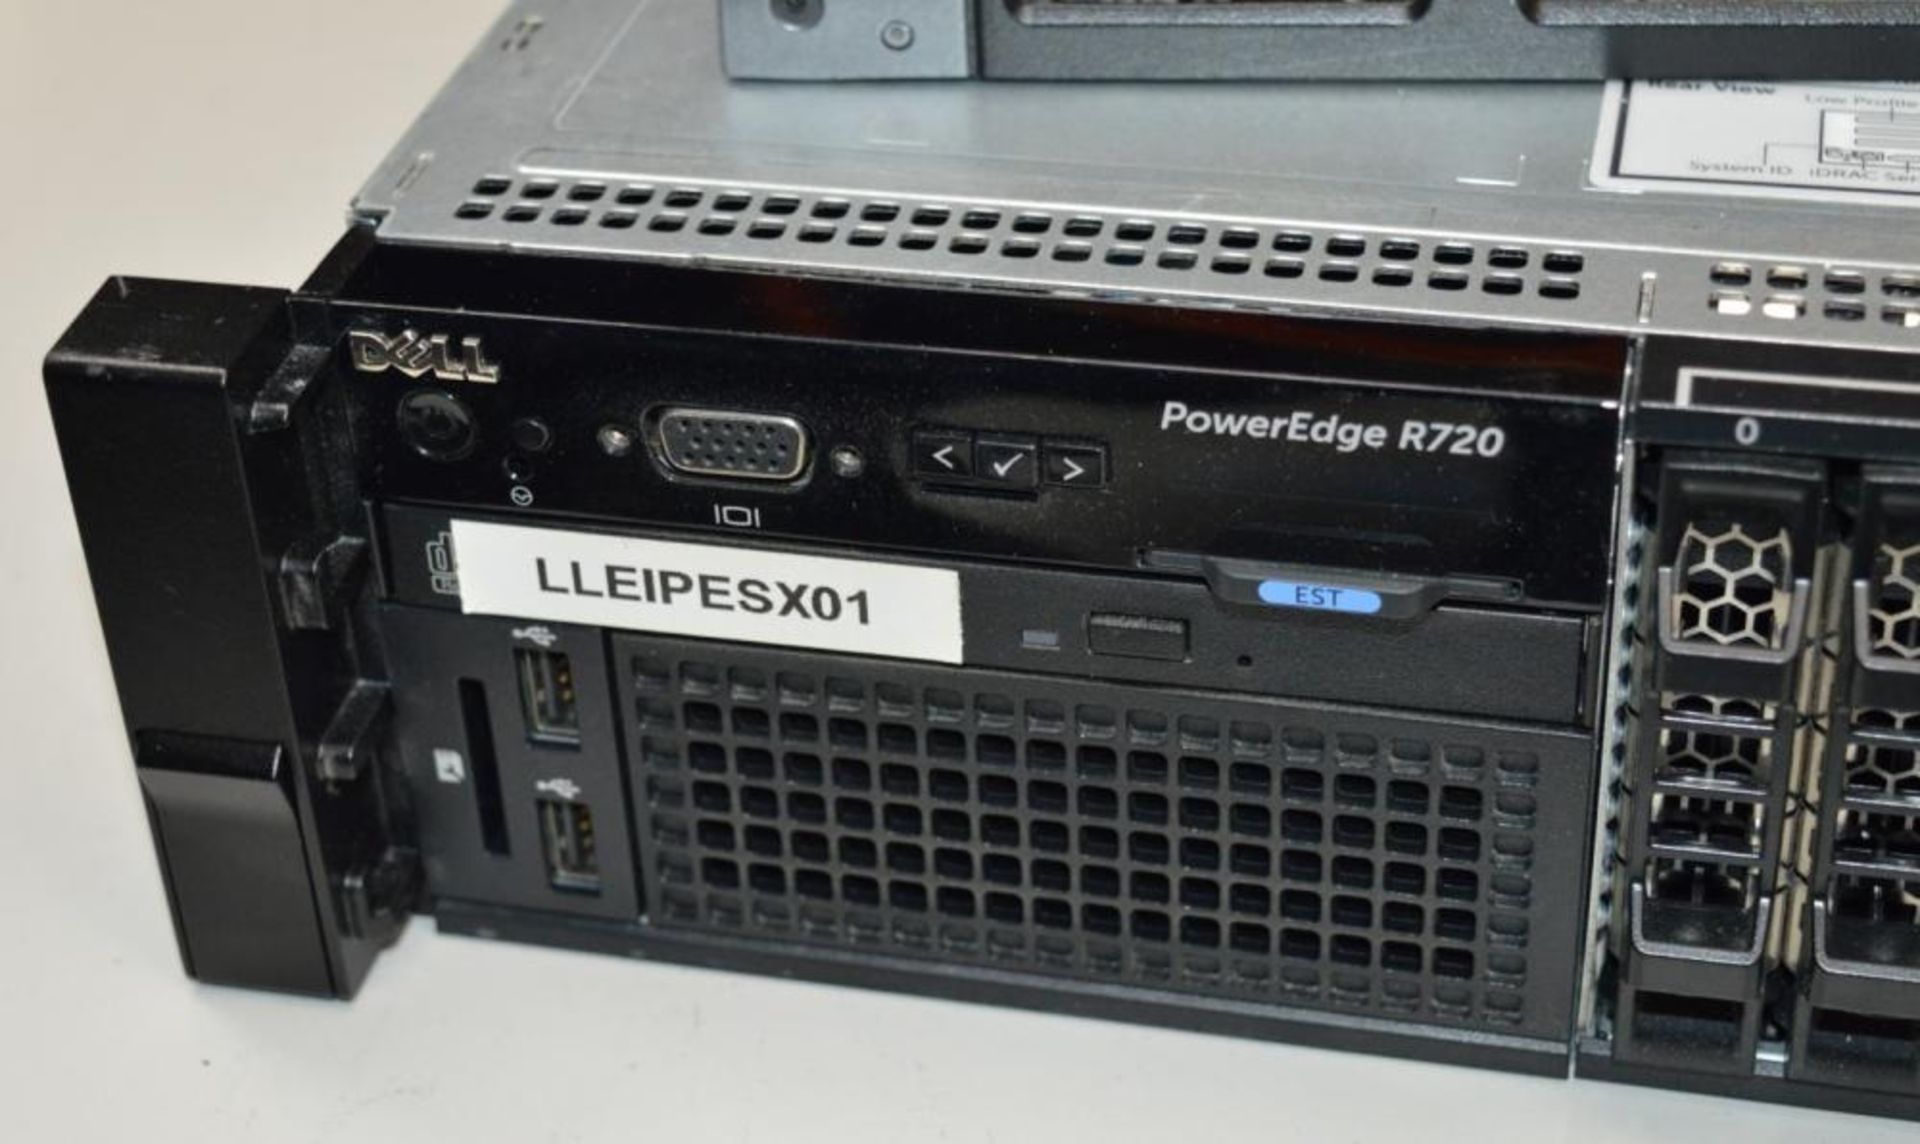 1 x Dell Power Edge R720 Rack Server - Features 2 x Intel Xeon E5-2630 Six Core CPU, 128gb DDR3 Ram - Image 5 of 6